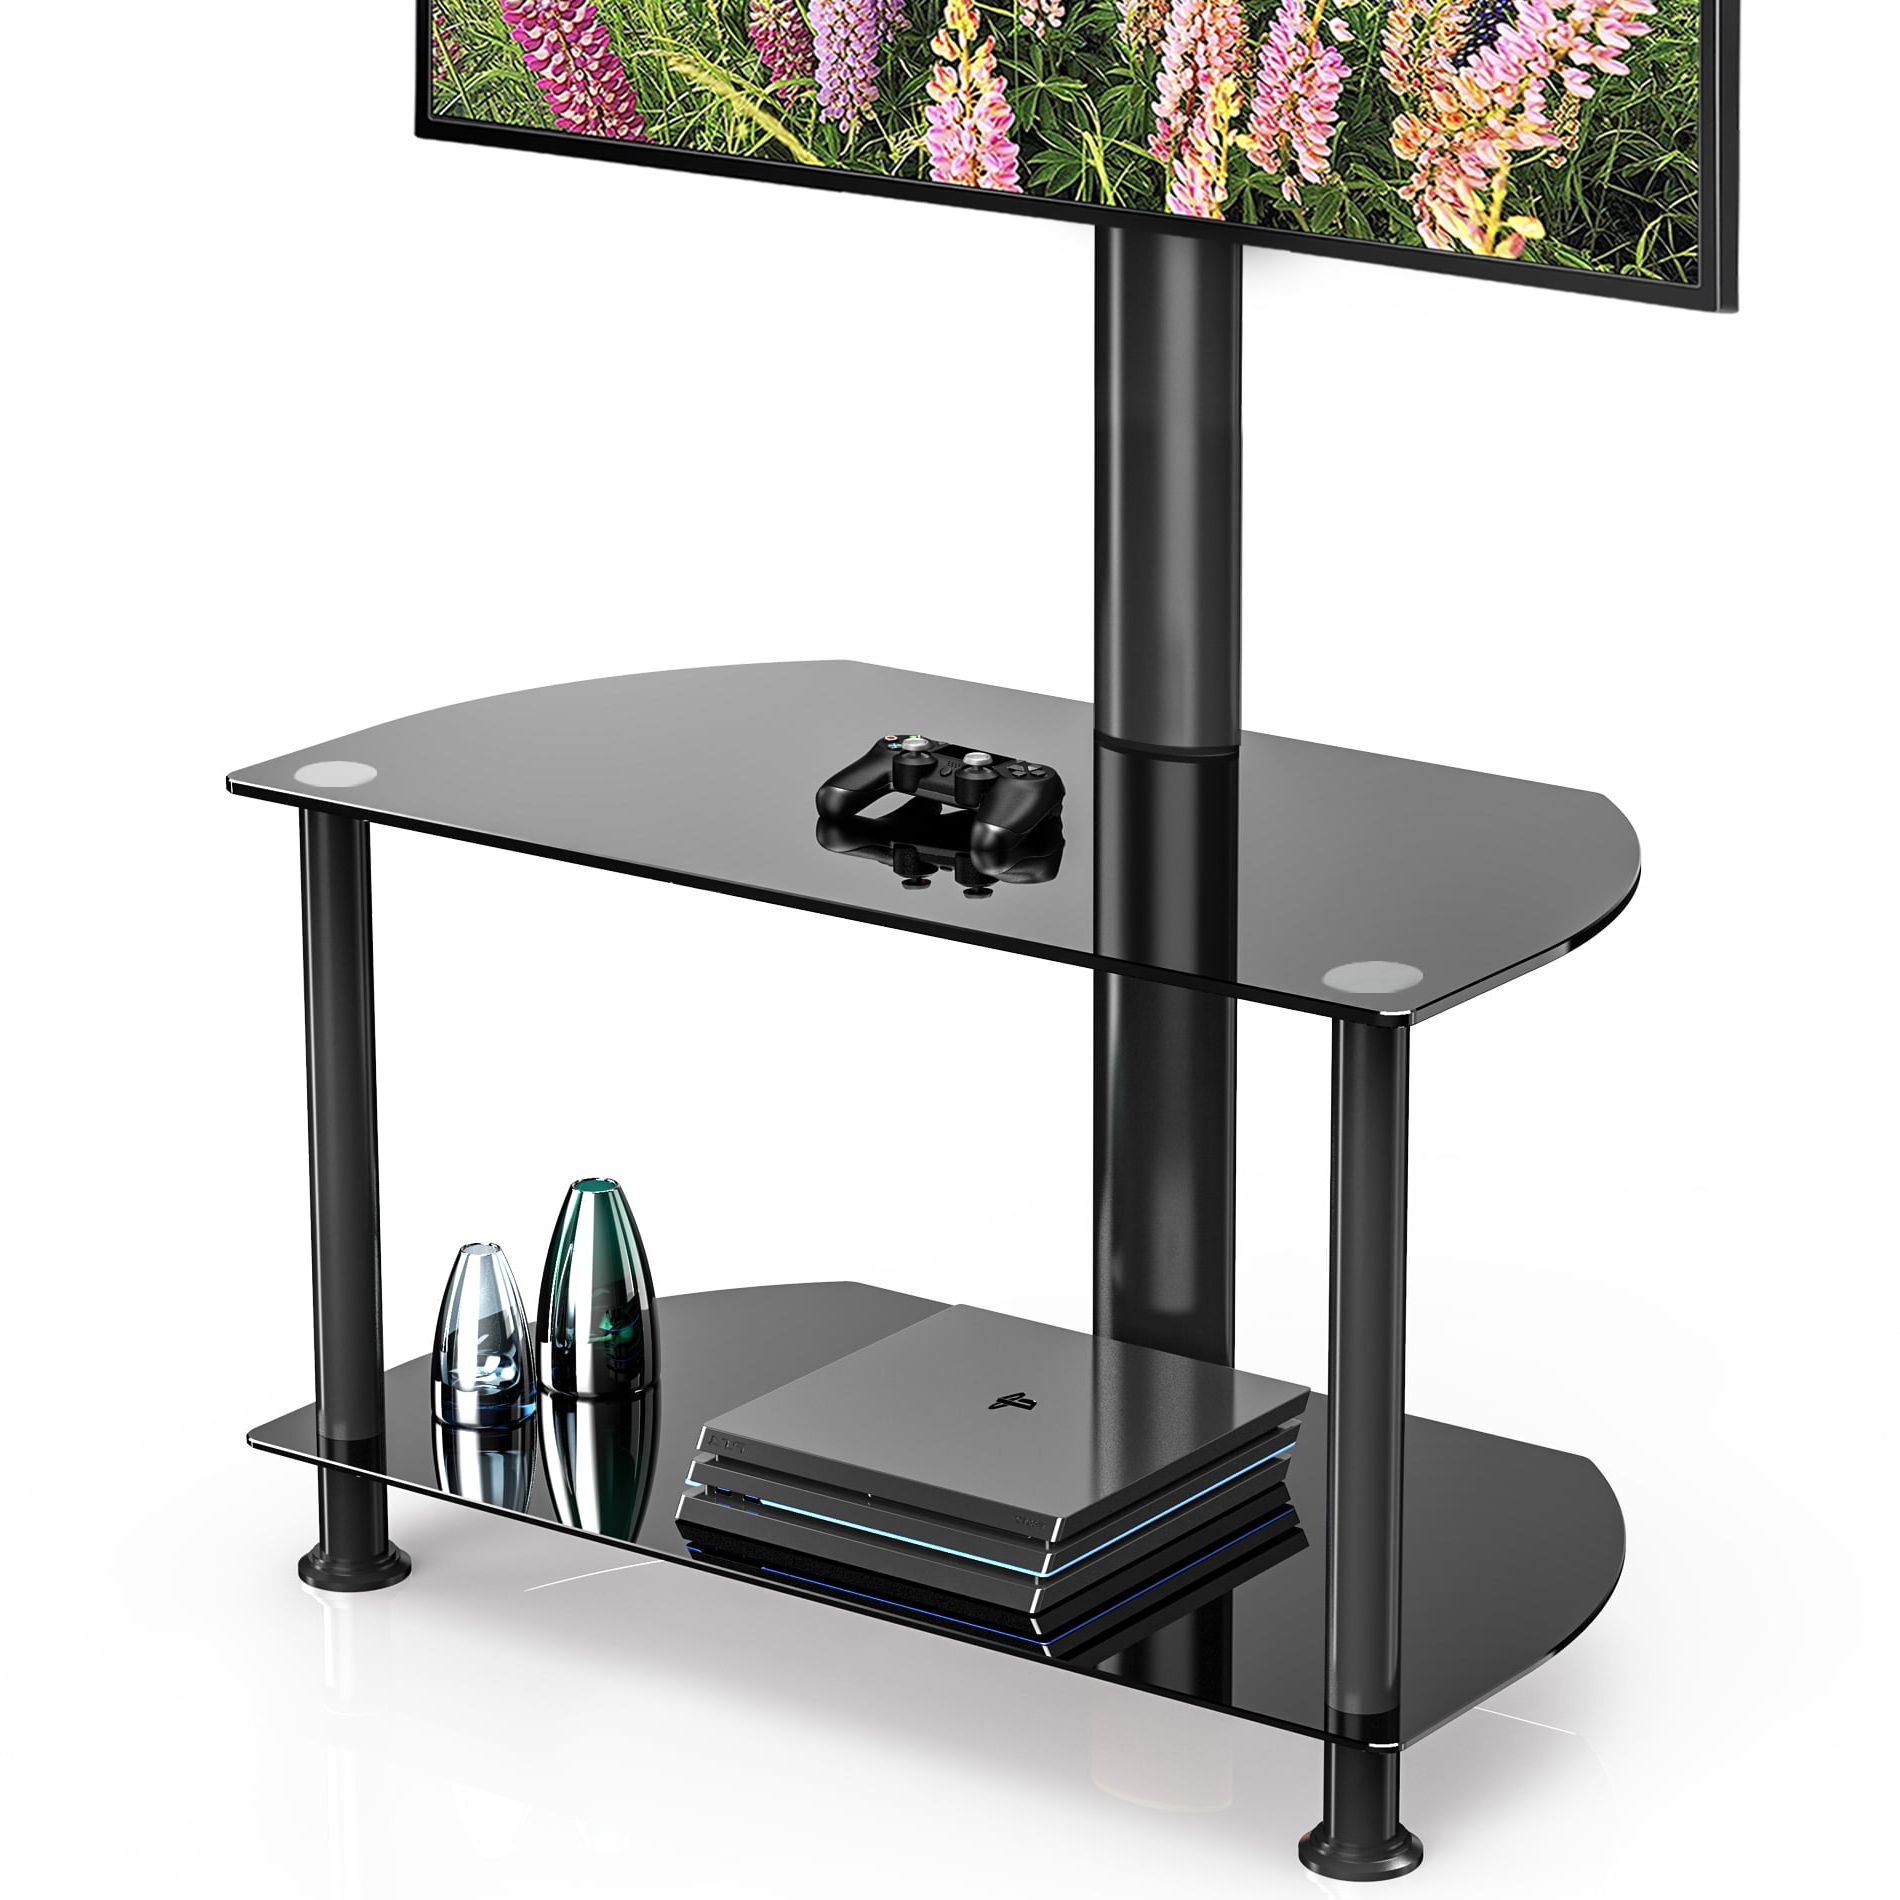 Fitueyes 2 Tiers Floor Tv Stand With Swivel Mount For 32 To 55 Inch In Most Up To Date Tier Stands For Tvs (View 3 of 15)